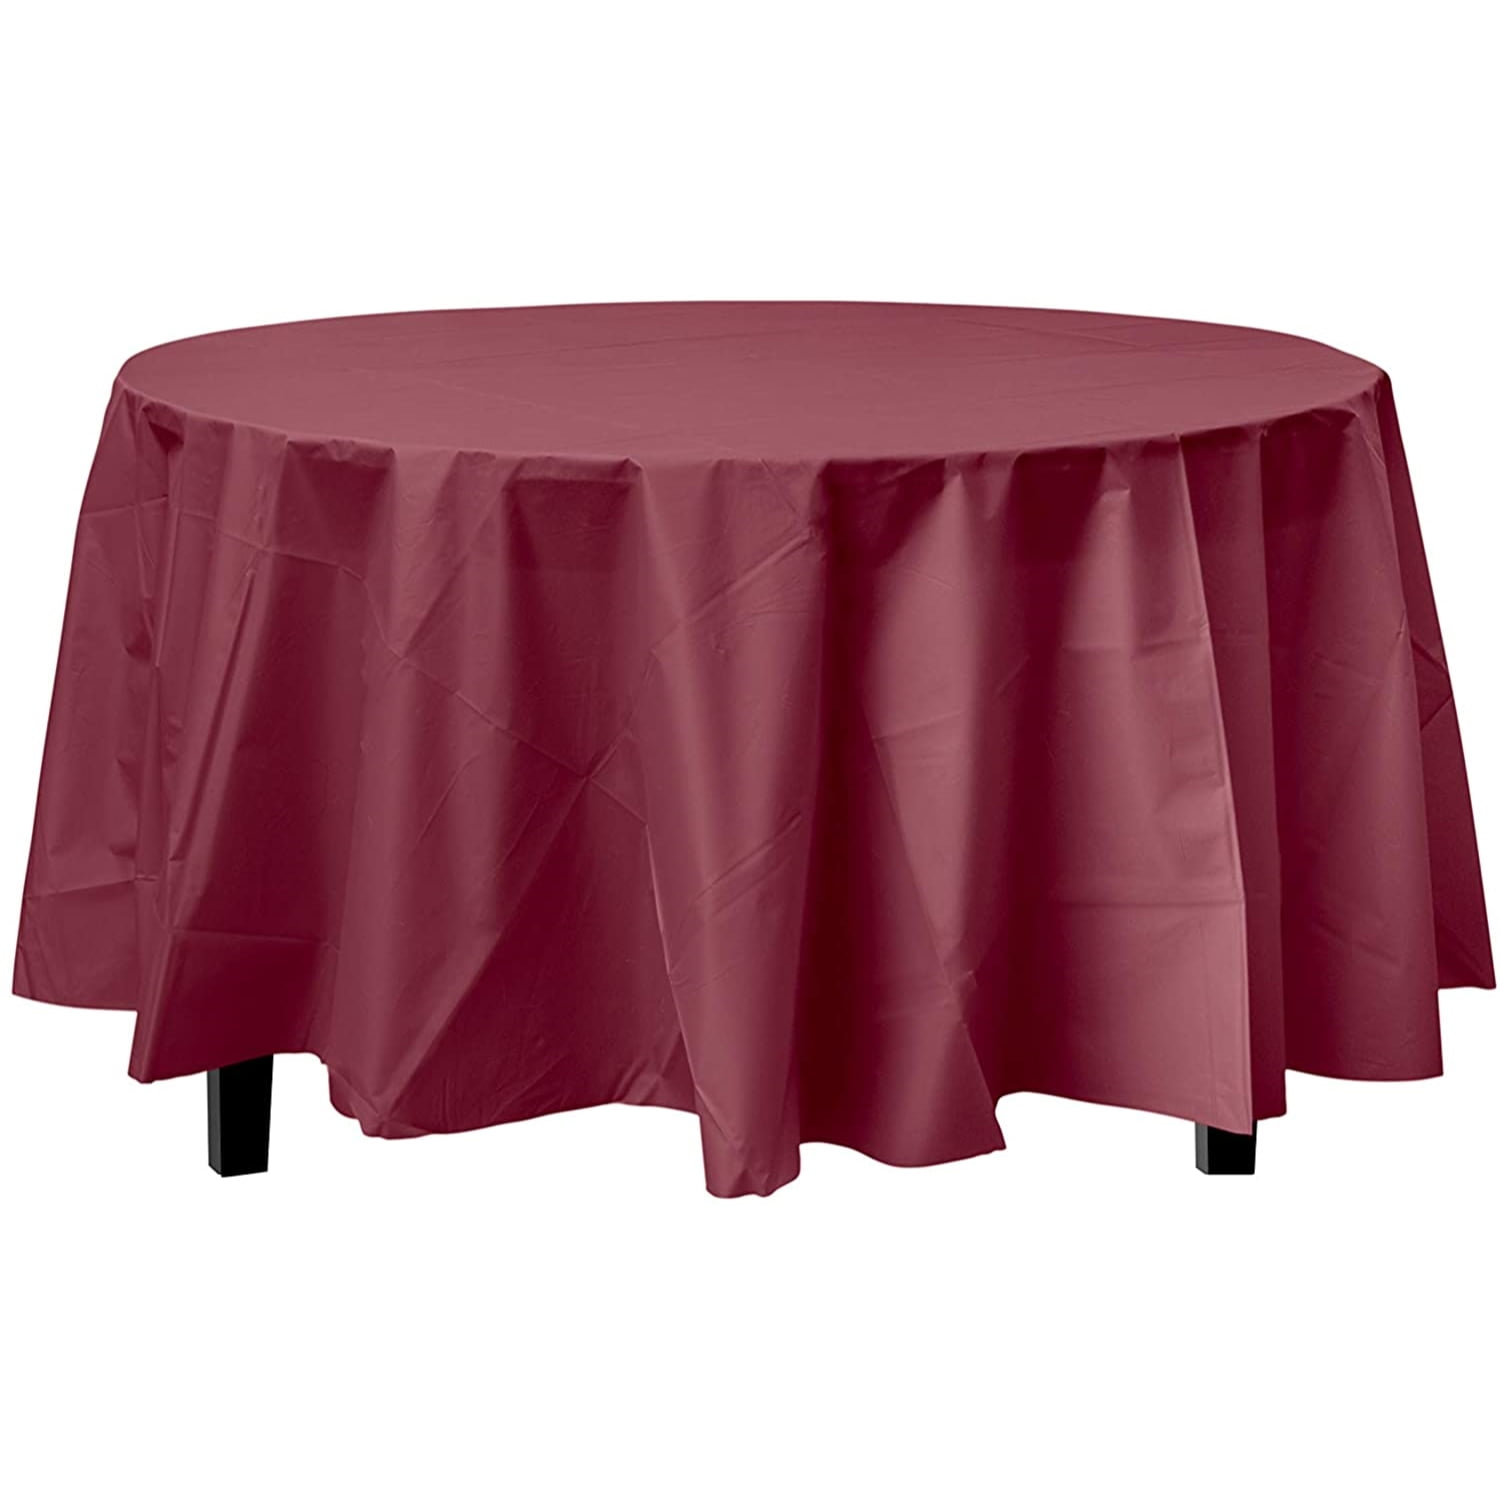 Exquisite 84” Round Tablecloth Cover Burgundy Disposable